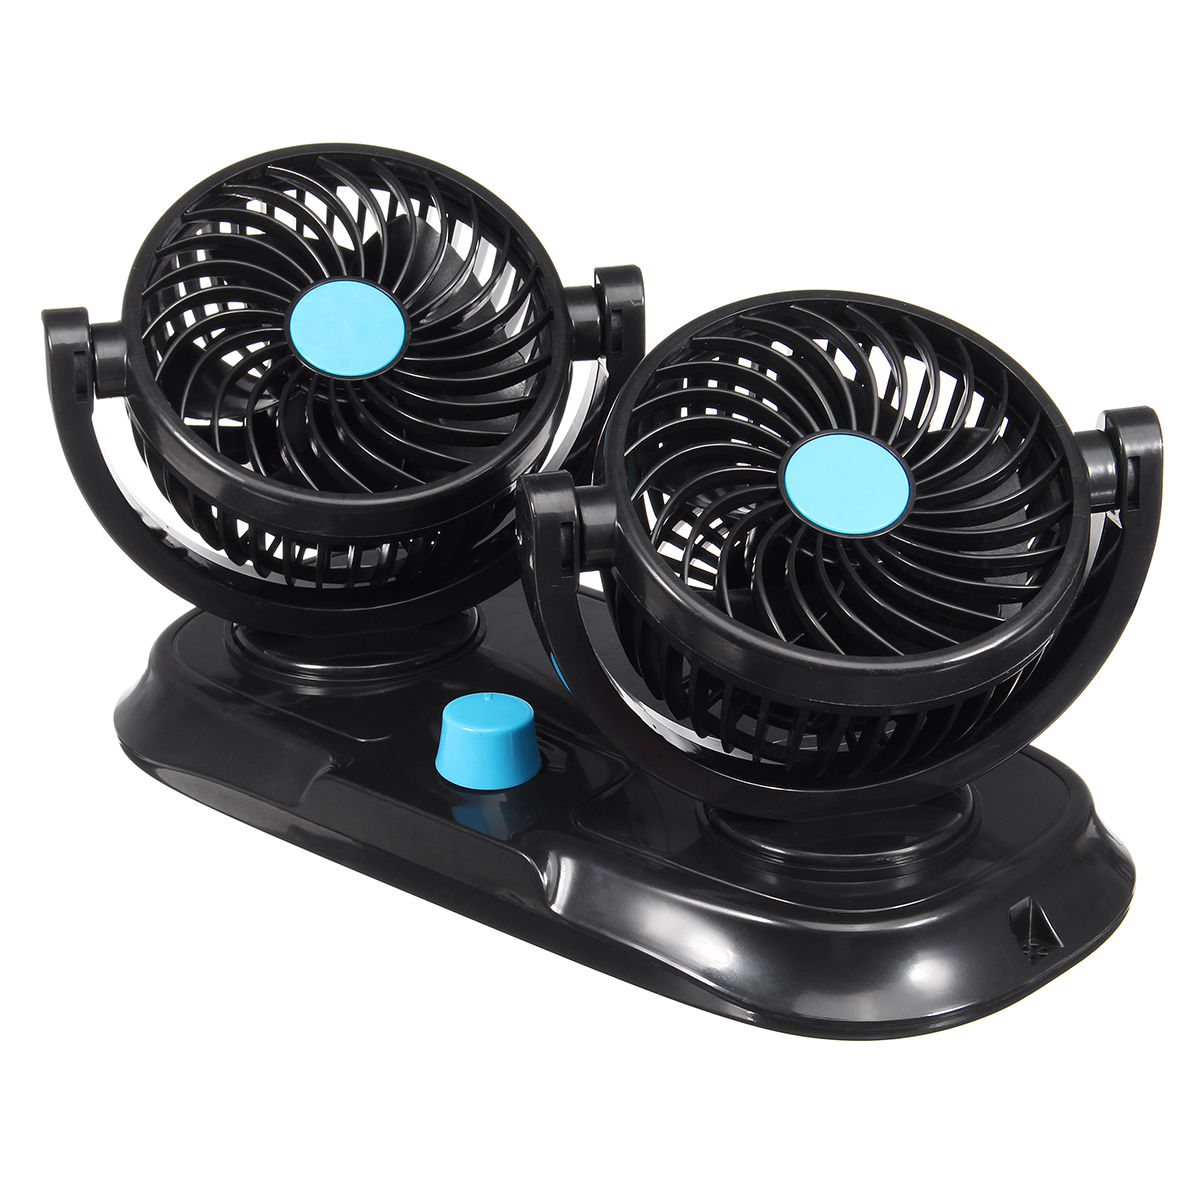 12V-Adjustable-Double-360-Degrees-Mini-Oscillating-Fan-Rotation-Cooling-Fan-Air-Conditioner-1338437-7